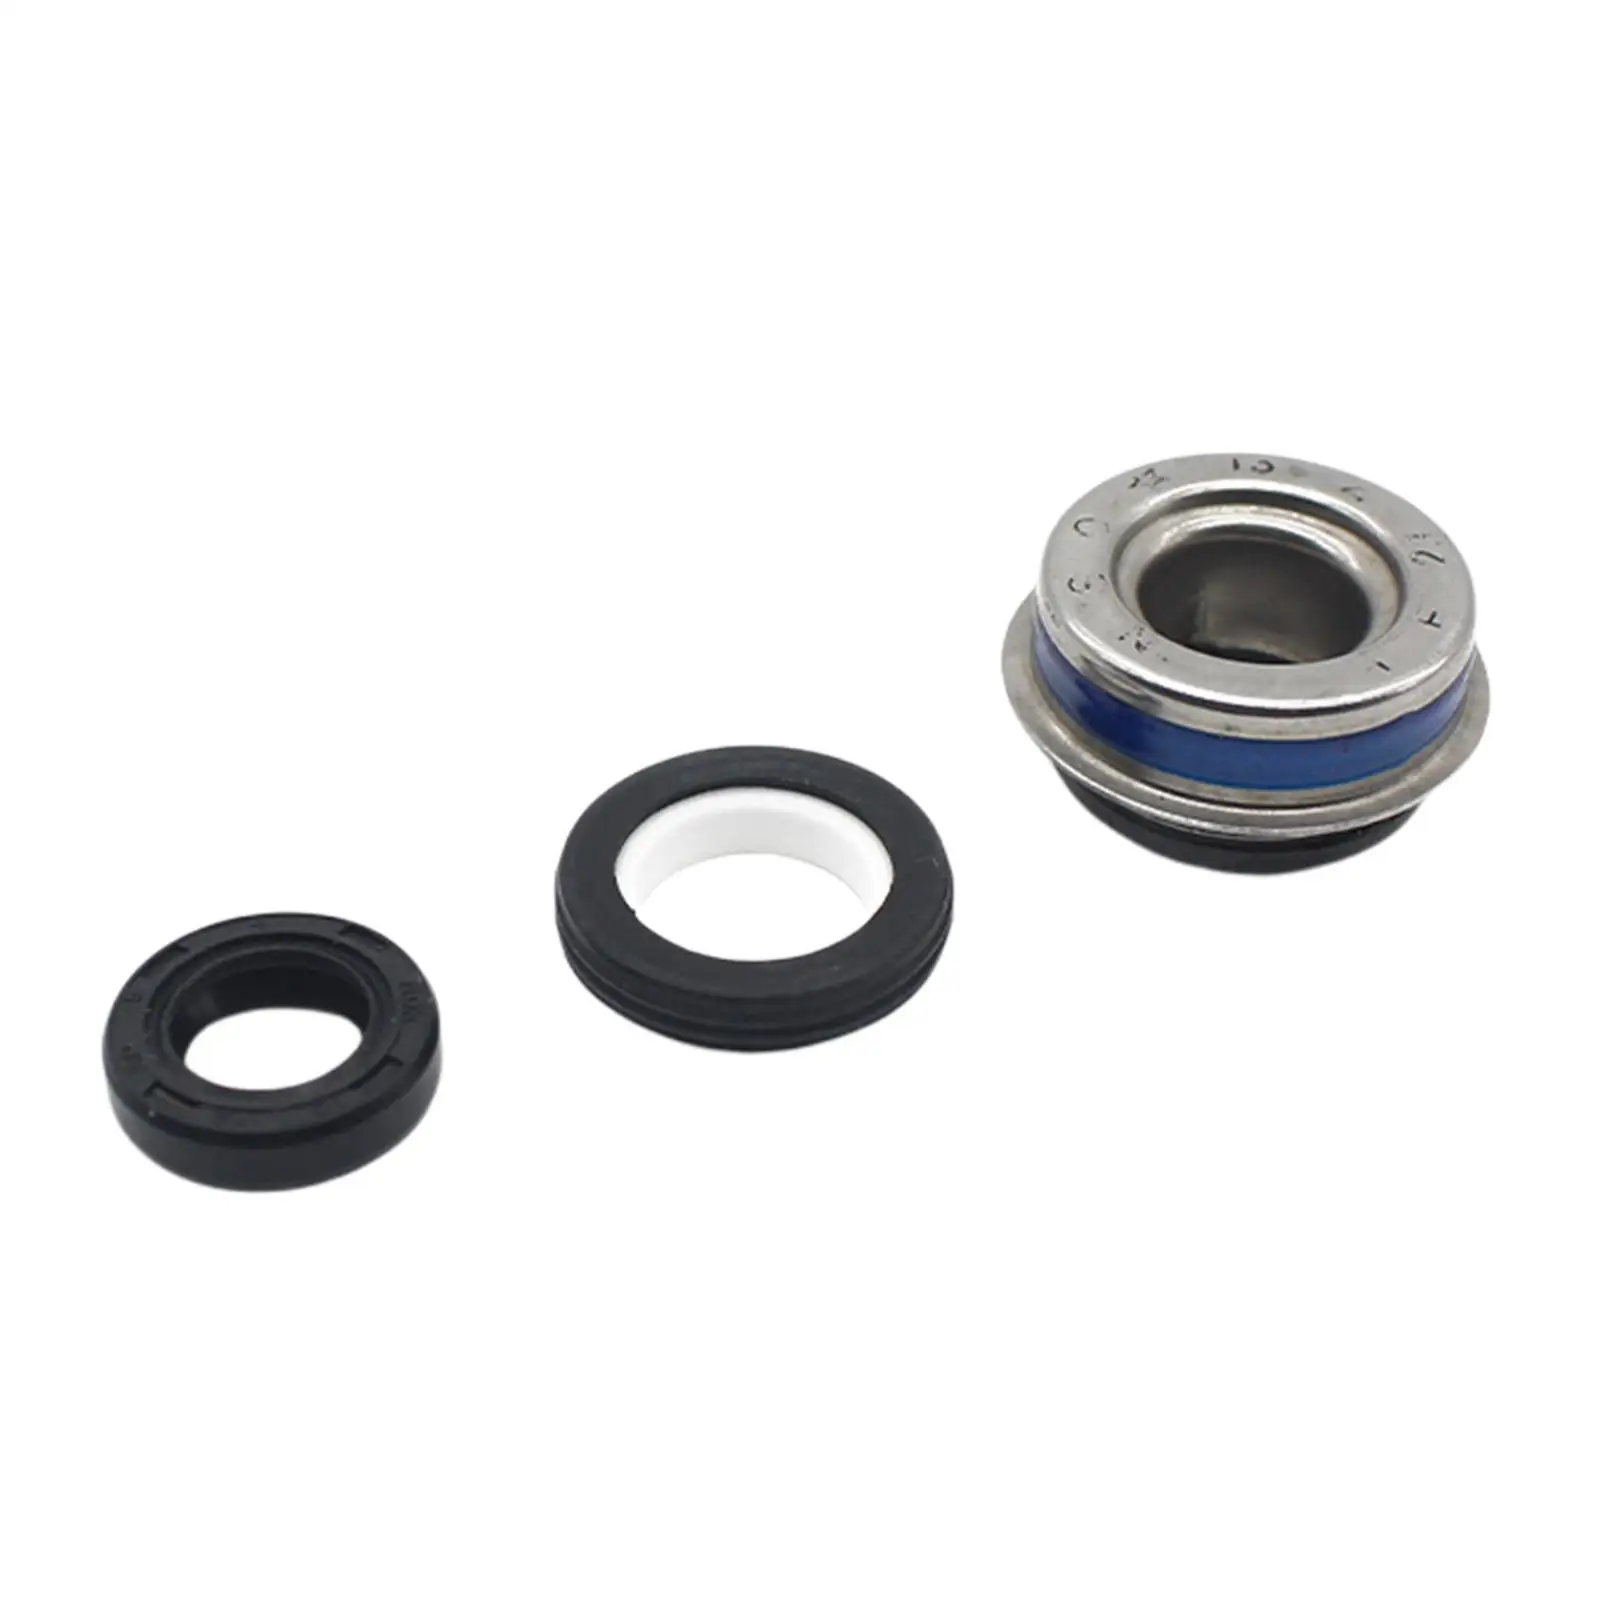 Water Pump Oil Seals Fit for YP500 Ab 2011 Easy to Install High Performance